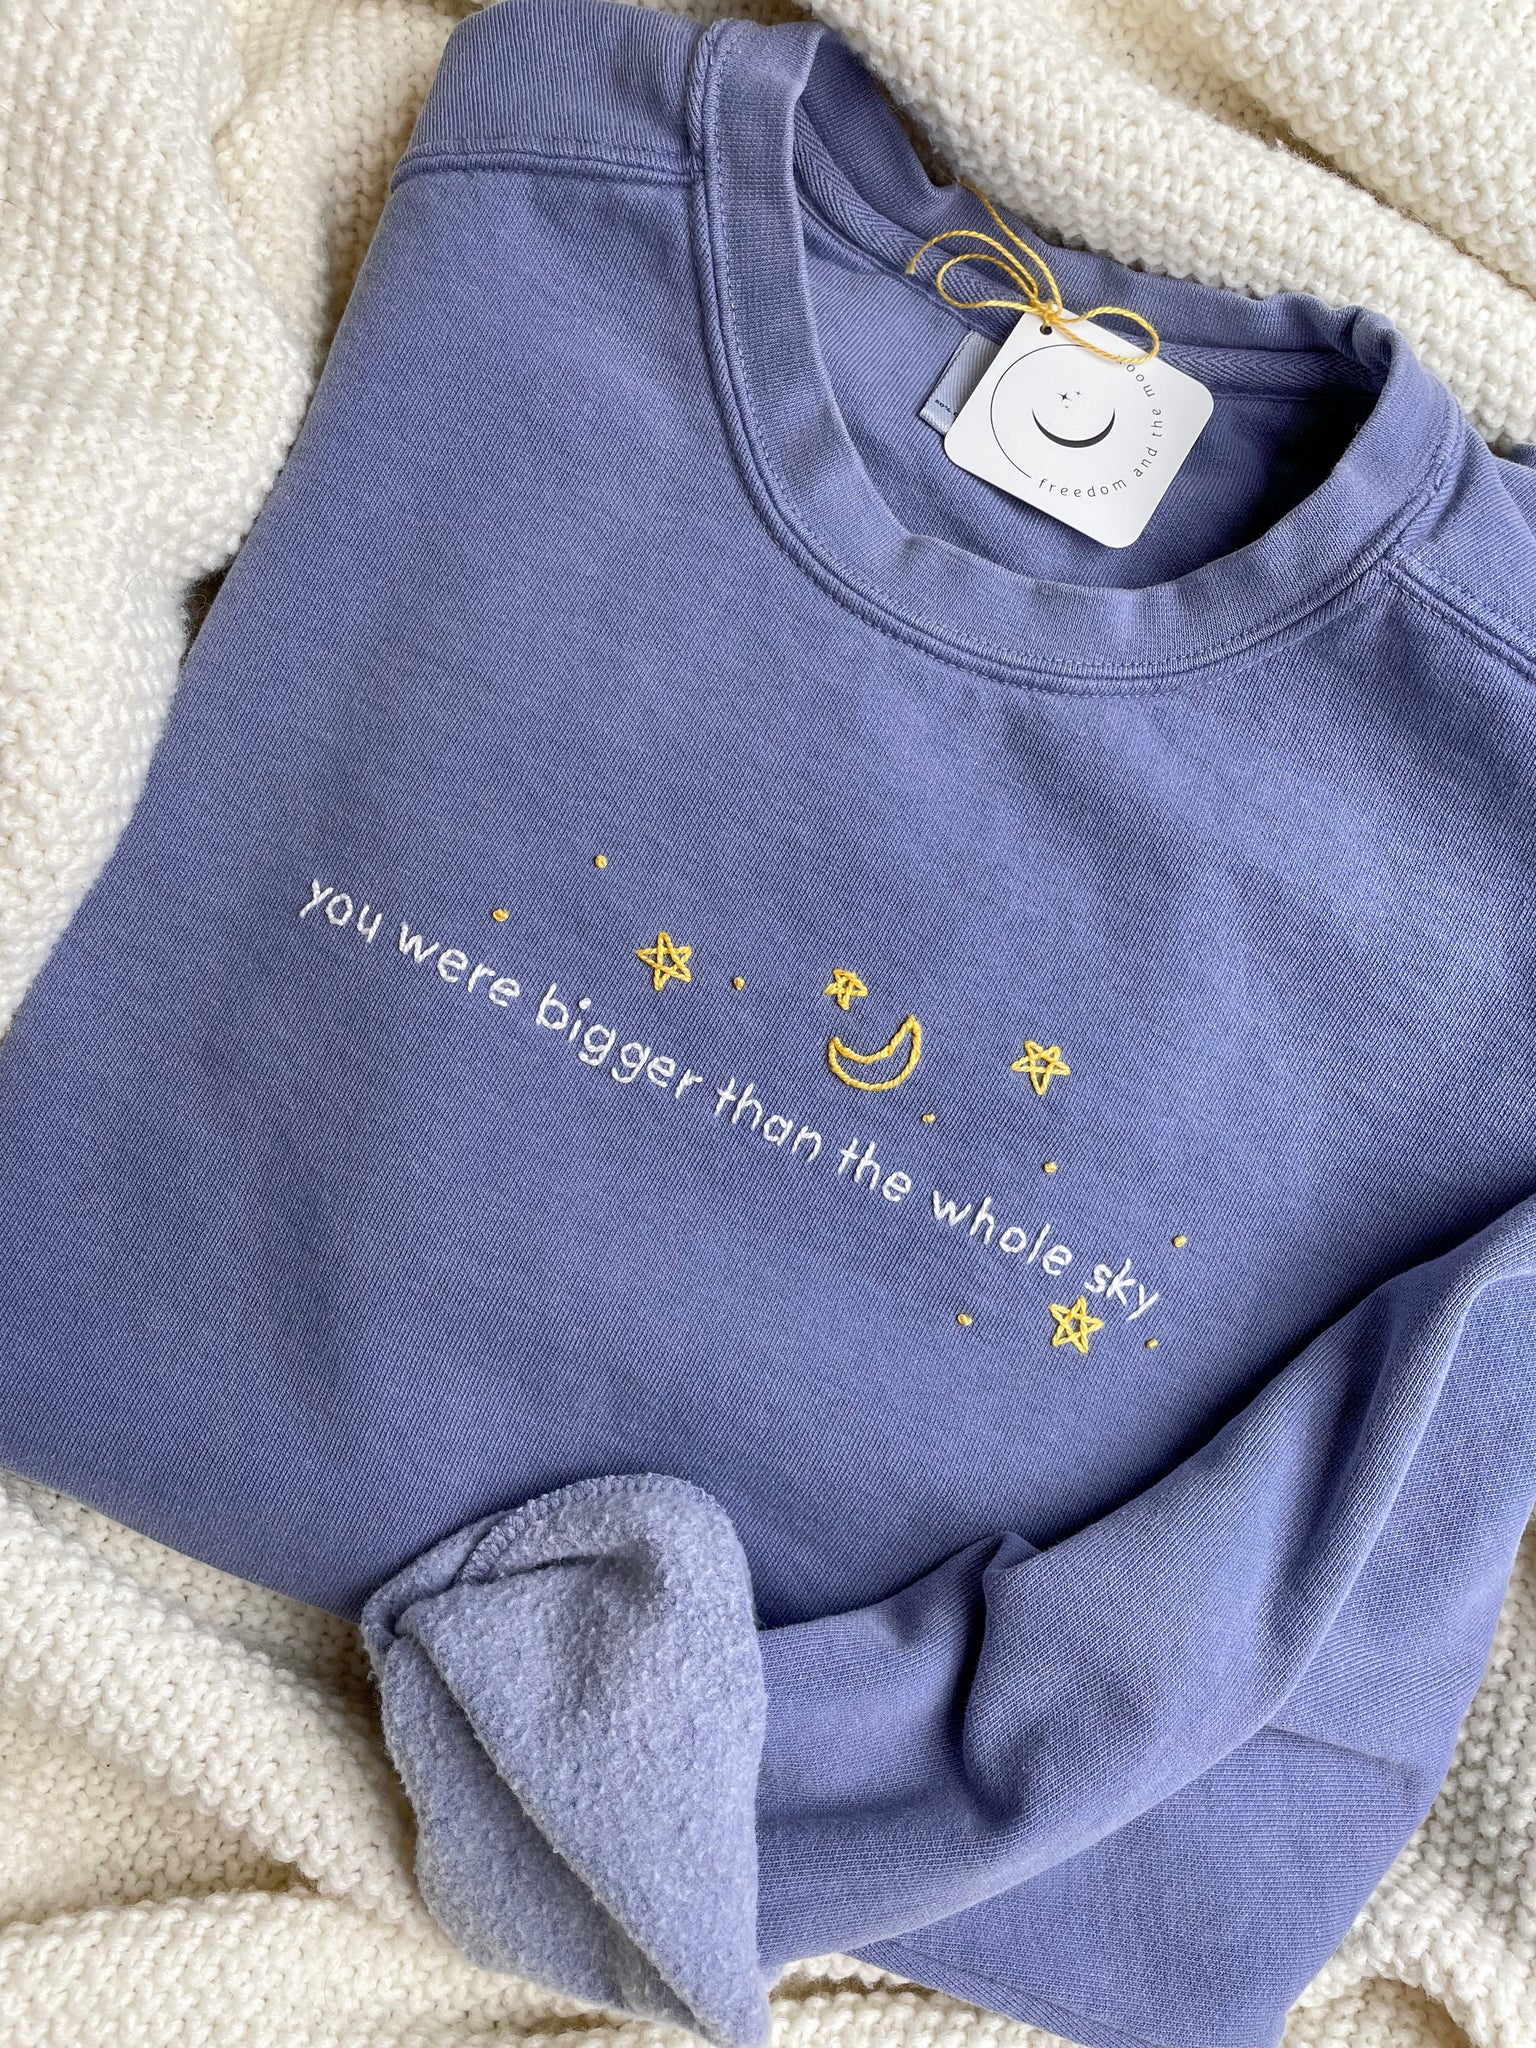 Bigger Than The Whole Sky Hand Embroidered Sweatshirt